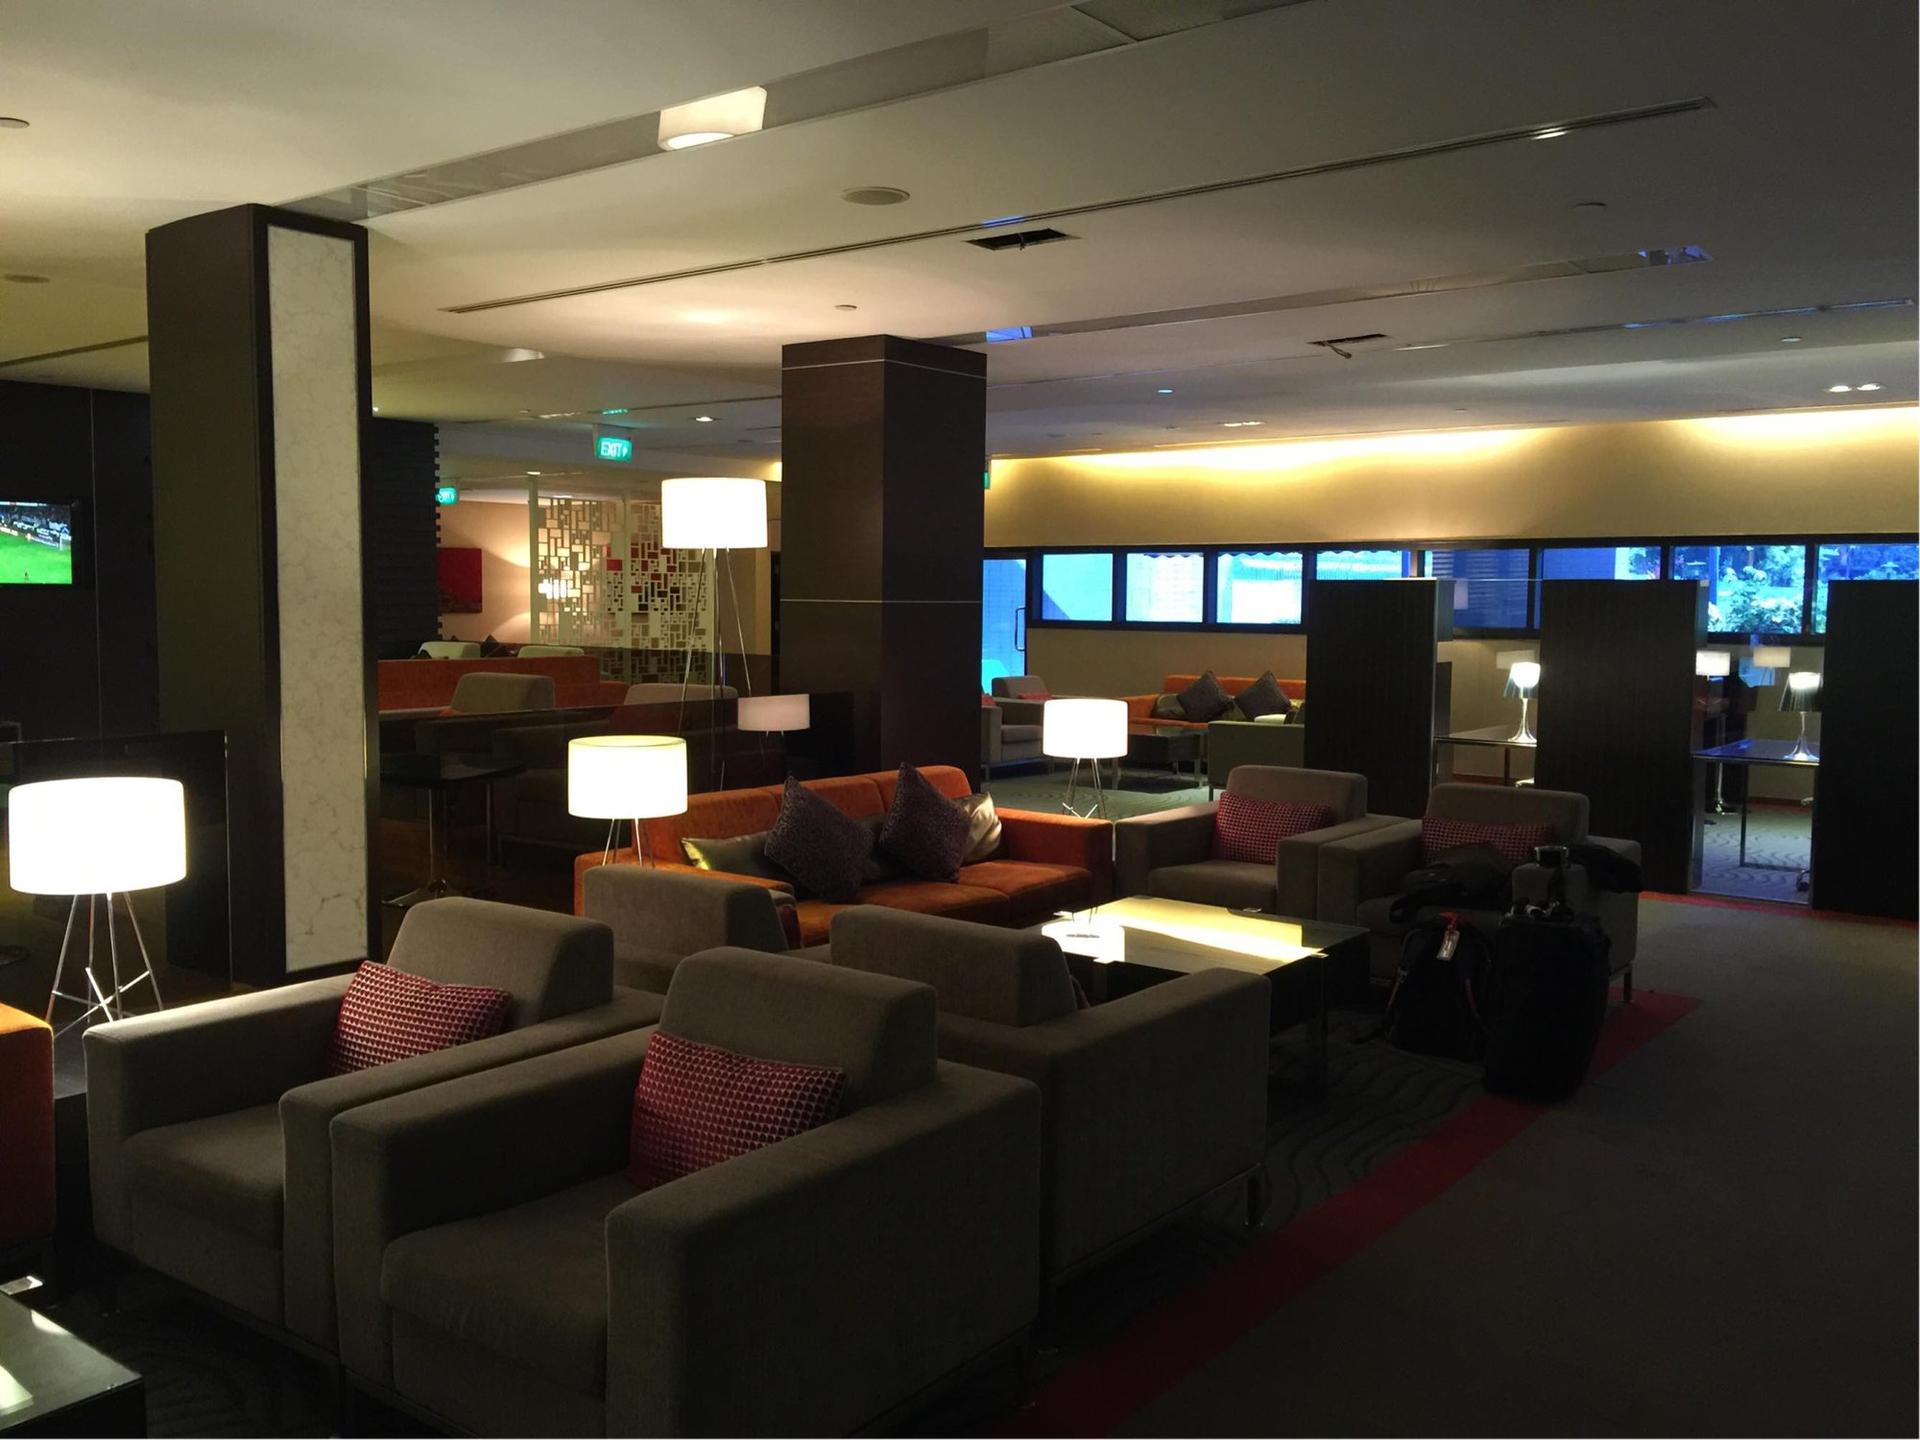 JetQuay CIP Terminal Lounge image 1 of 7